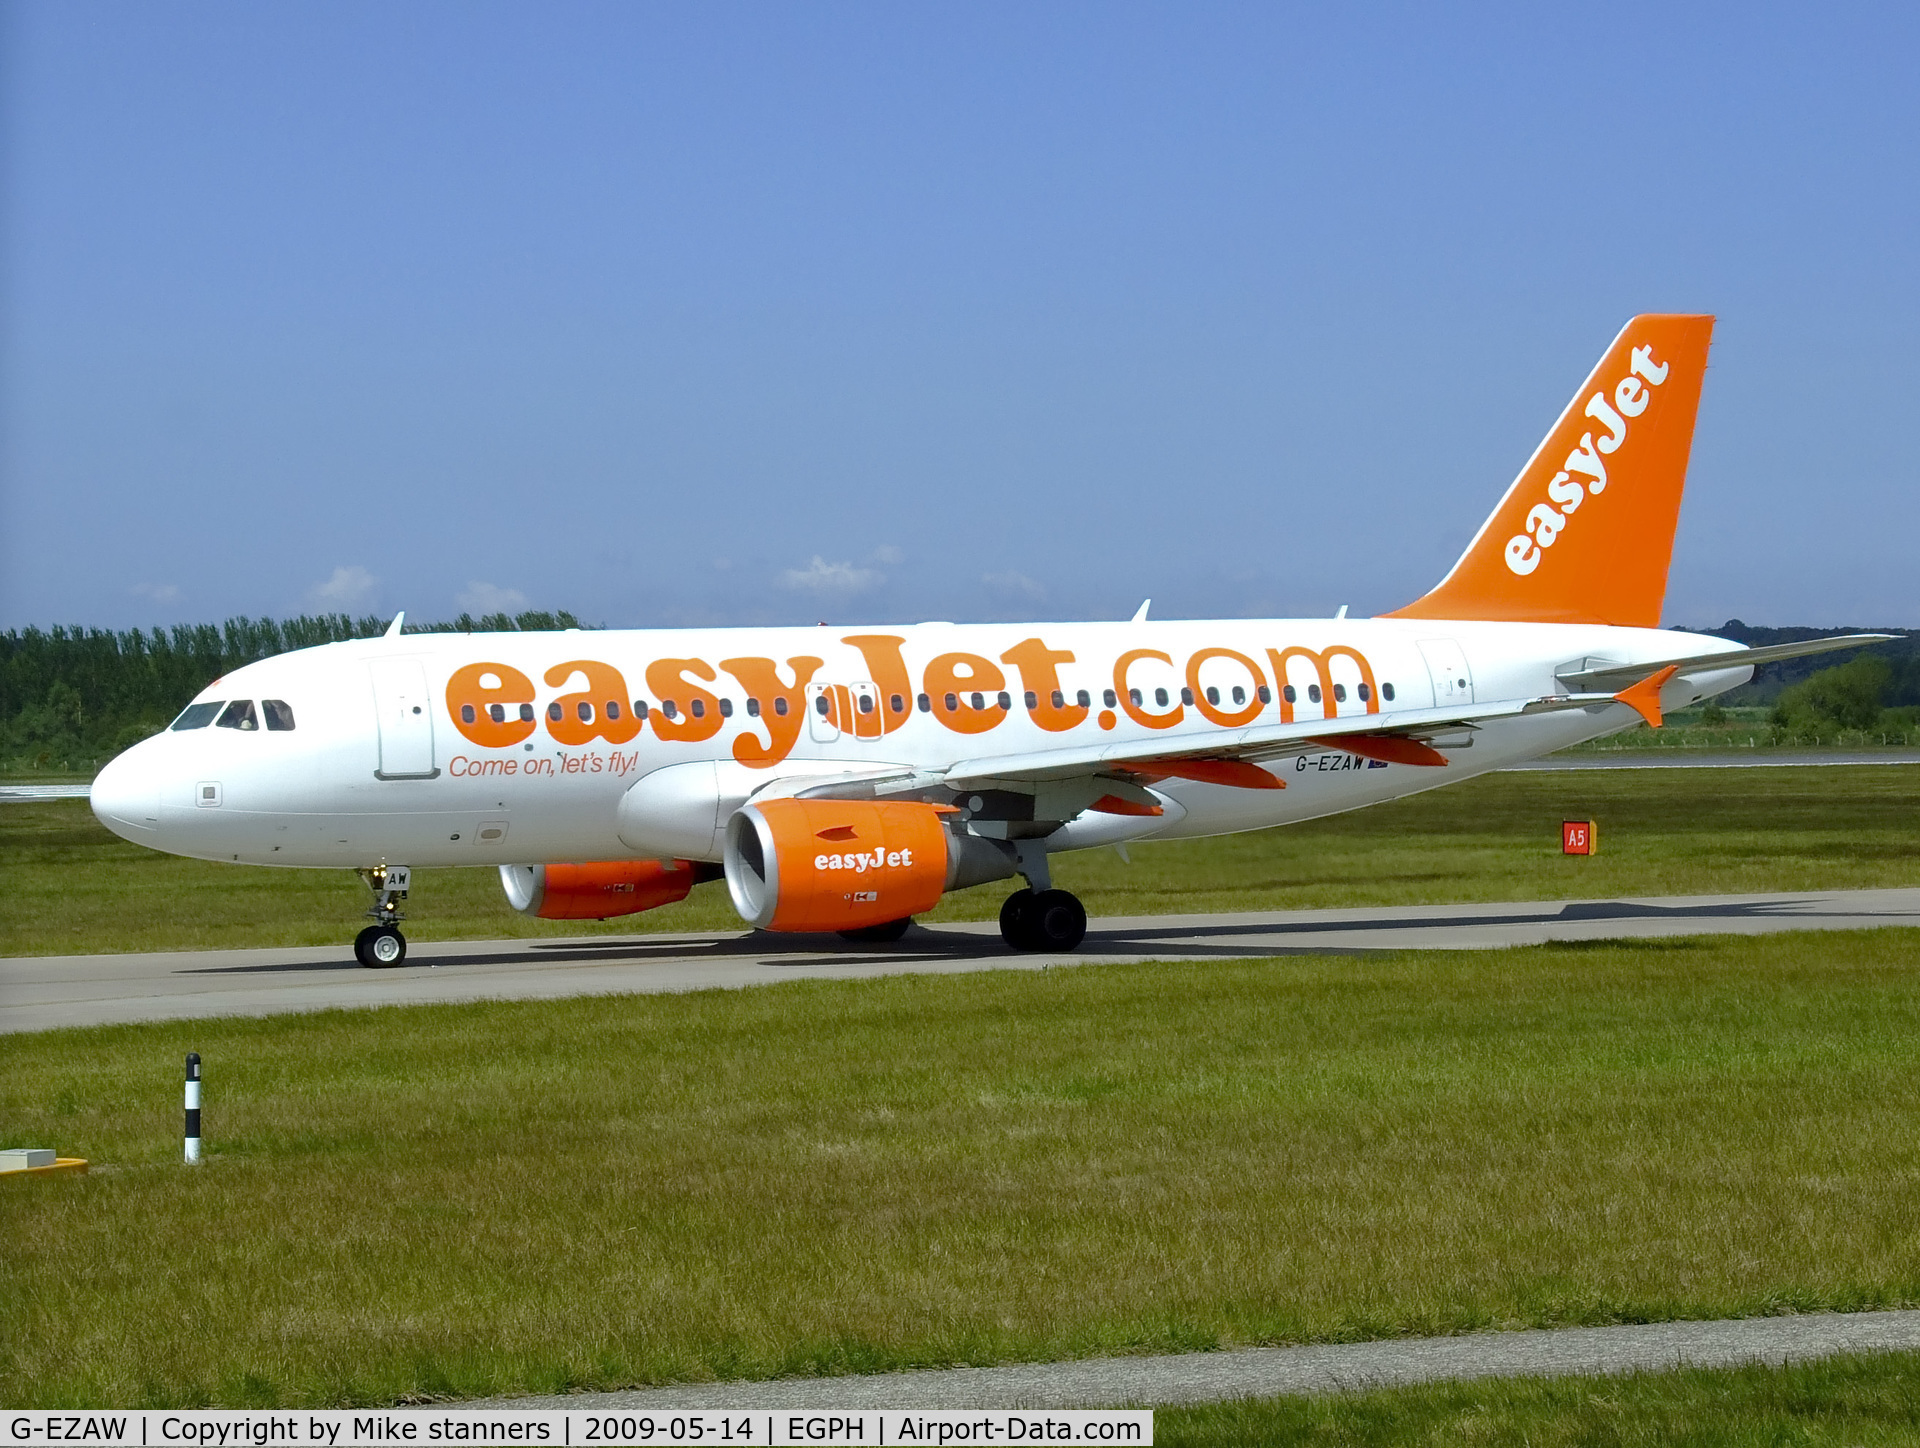 G-EZAW, 2006 Airbus A319-111 C/N 2812, Easyjet A319 Taxiing to runway 06 at EDI